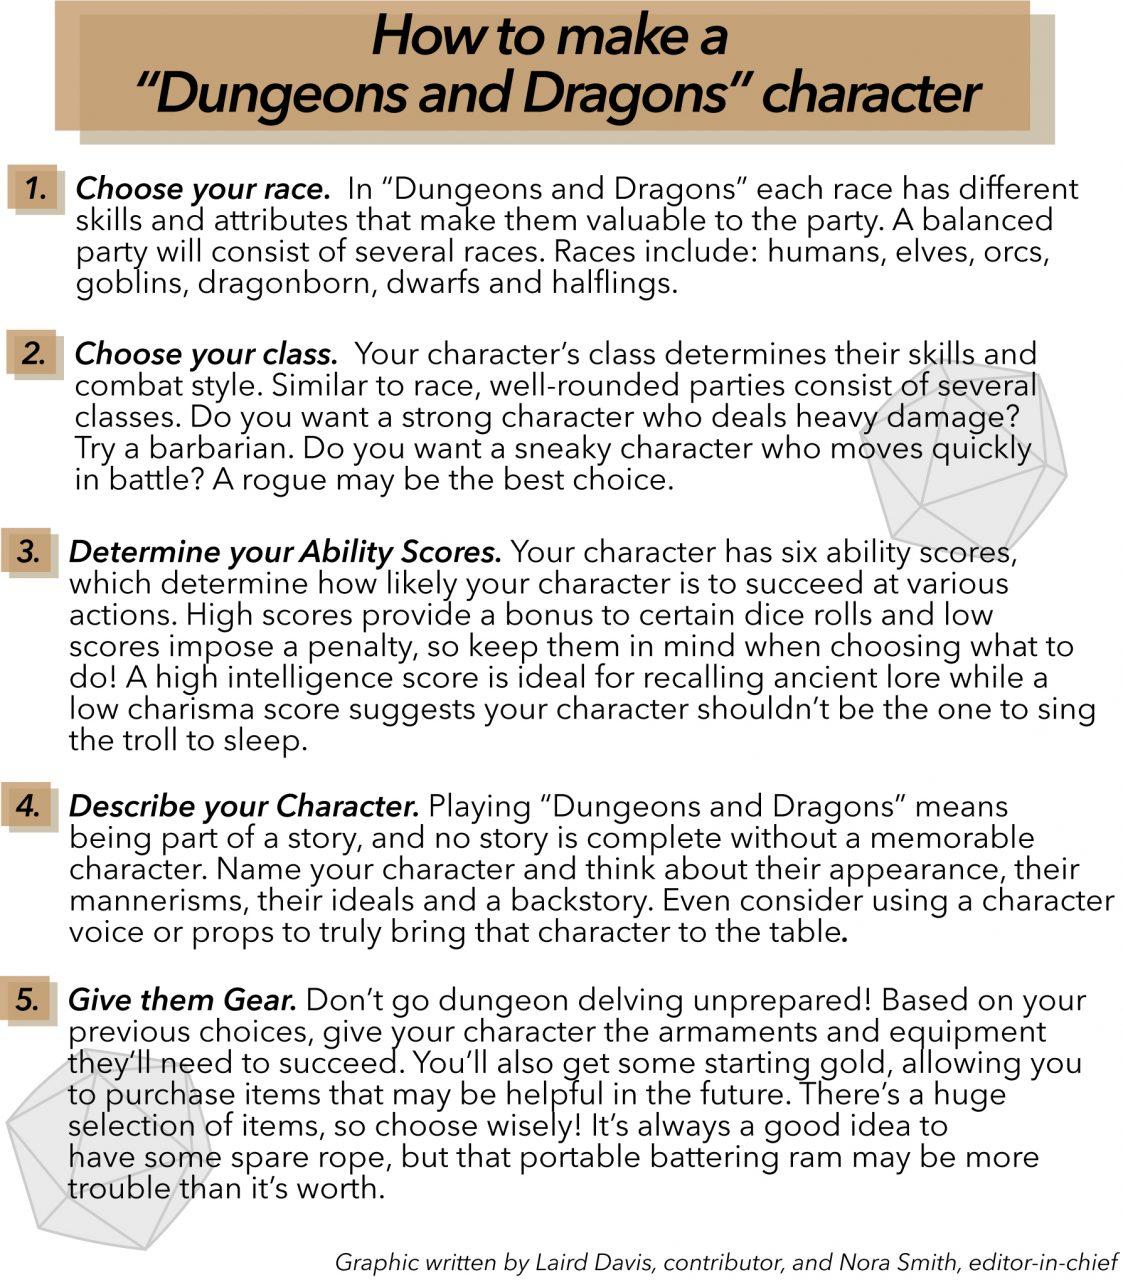 Freshman group bonds over “Dungeons and Dragons”